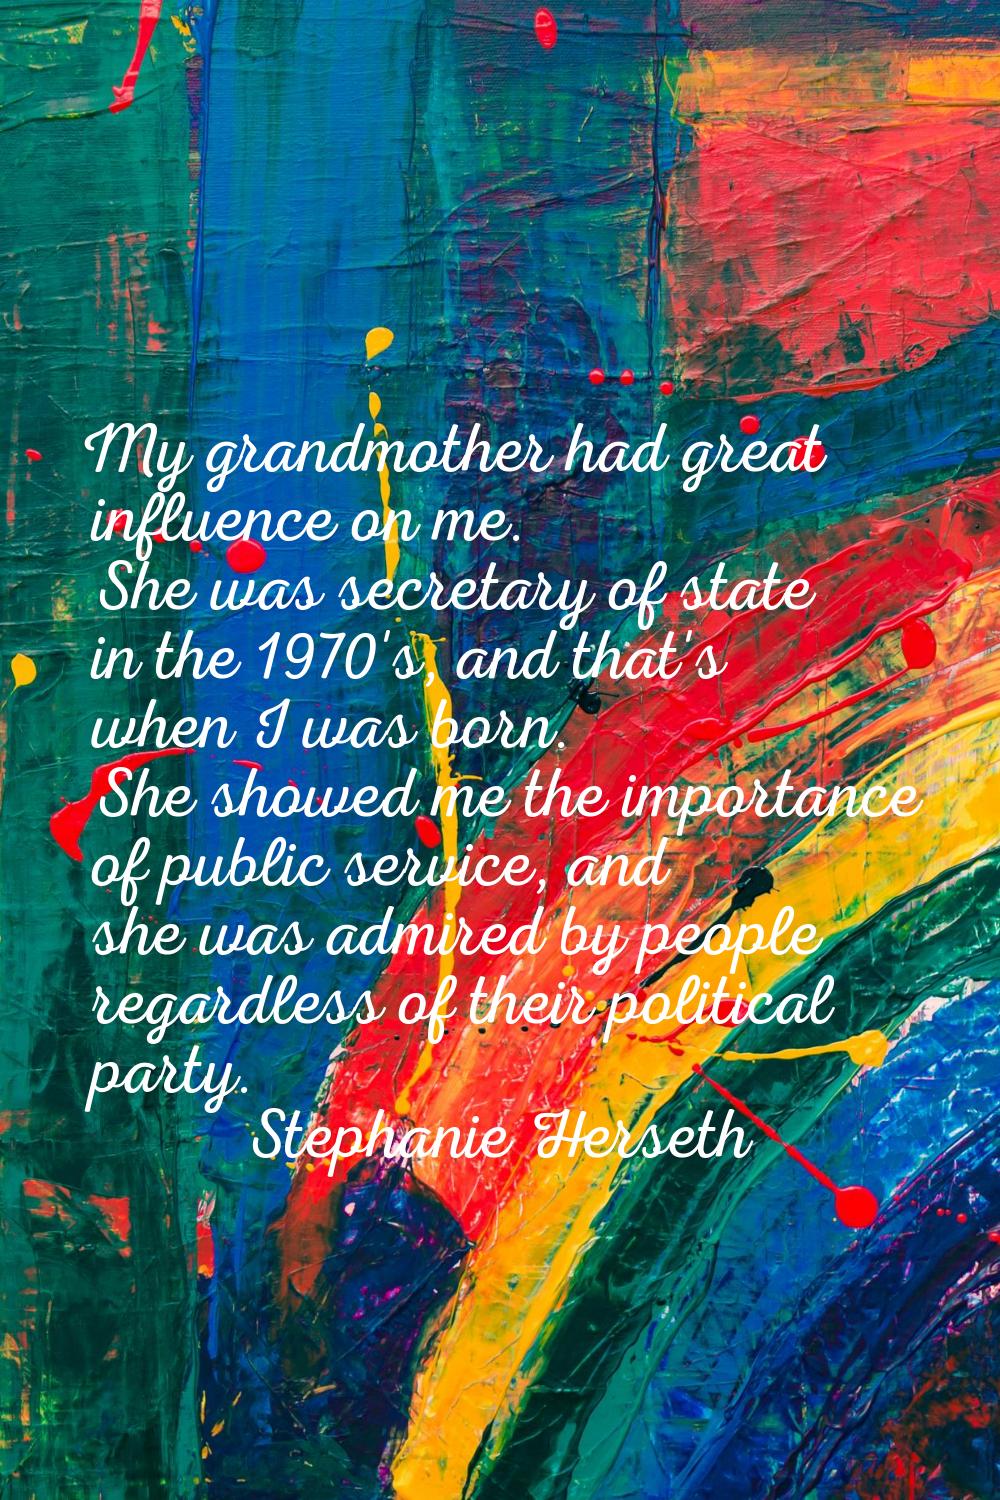 My grandmother had great influence on me. She was secretary of state in the 1970's, and that's when